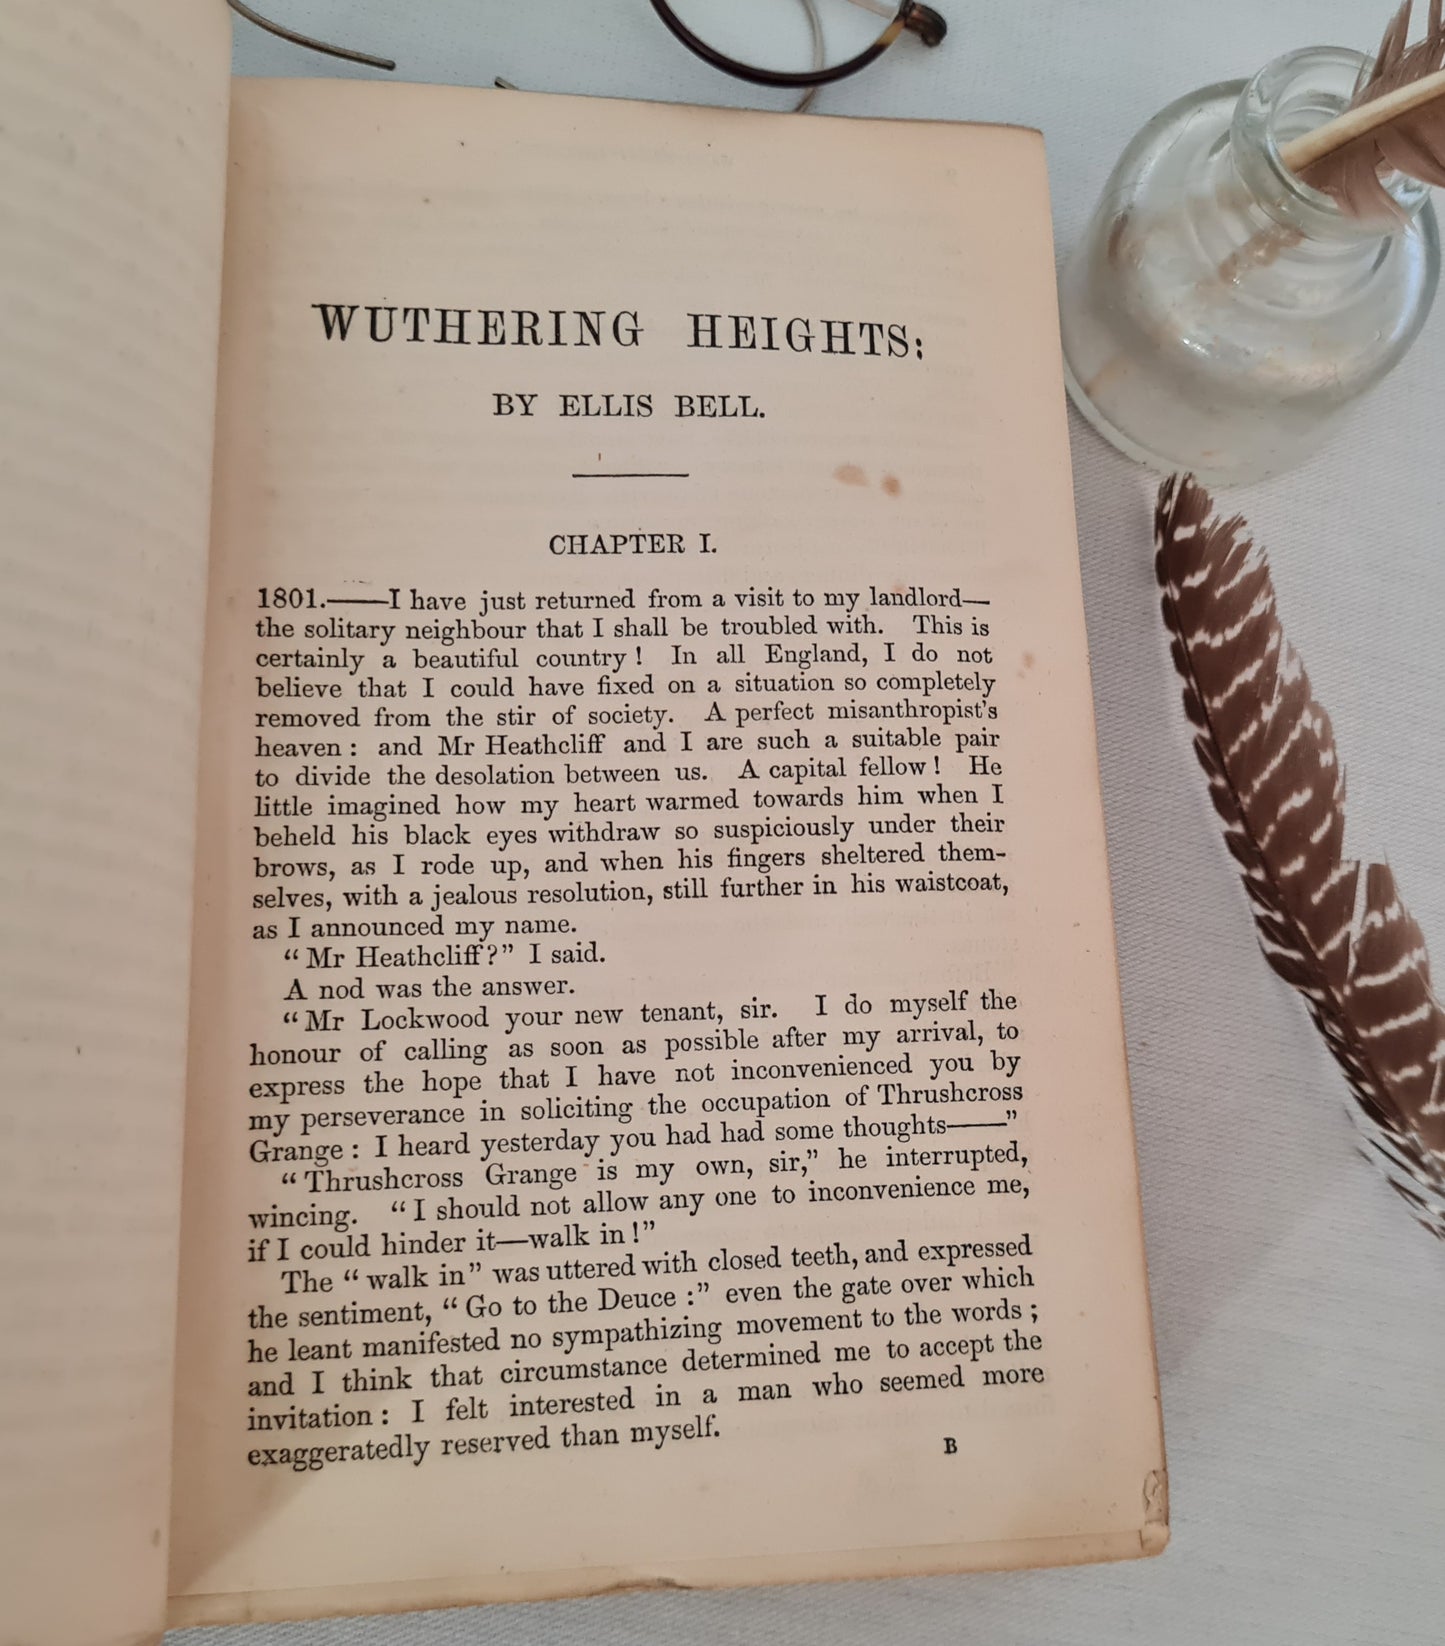 1858 Wuthering Heights by Ellis Bell & Agnes Grey by Acton Bell (Bronte) / Extremely Early Copy Published Just 11 Years After The Original